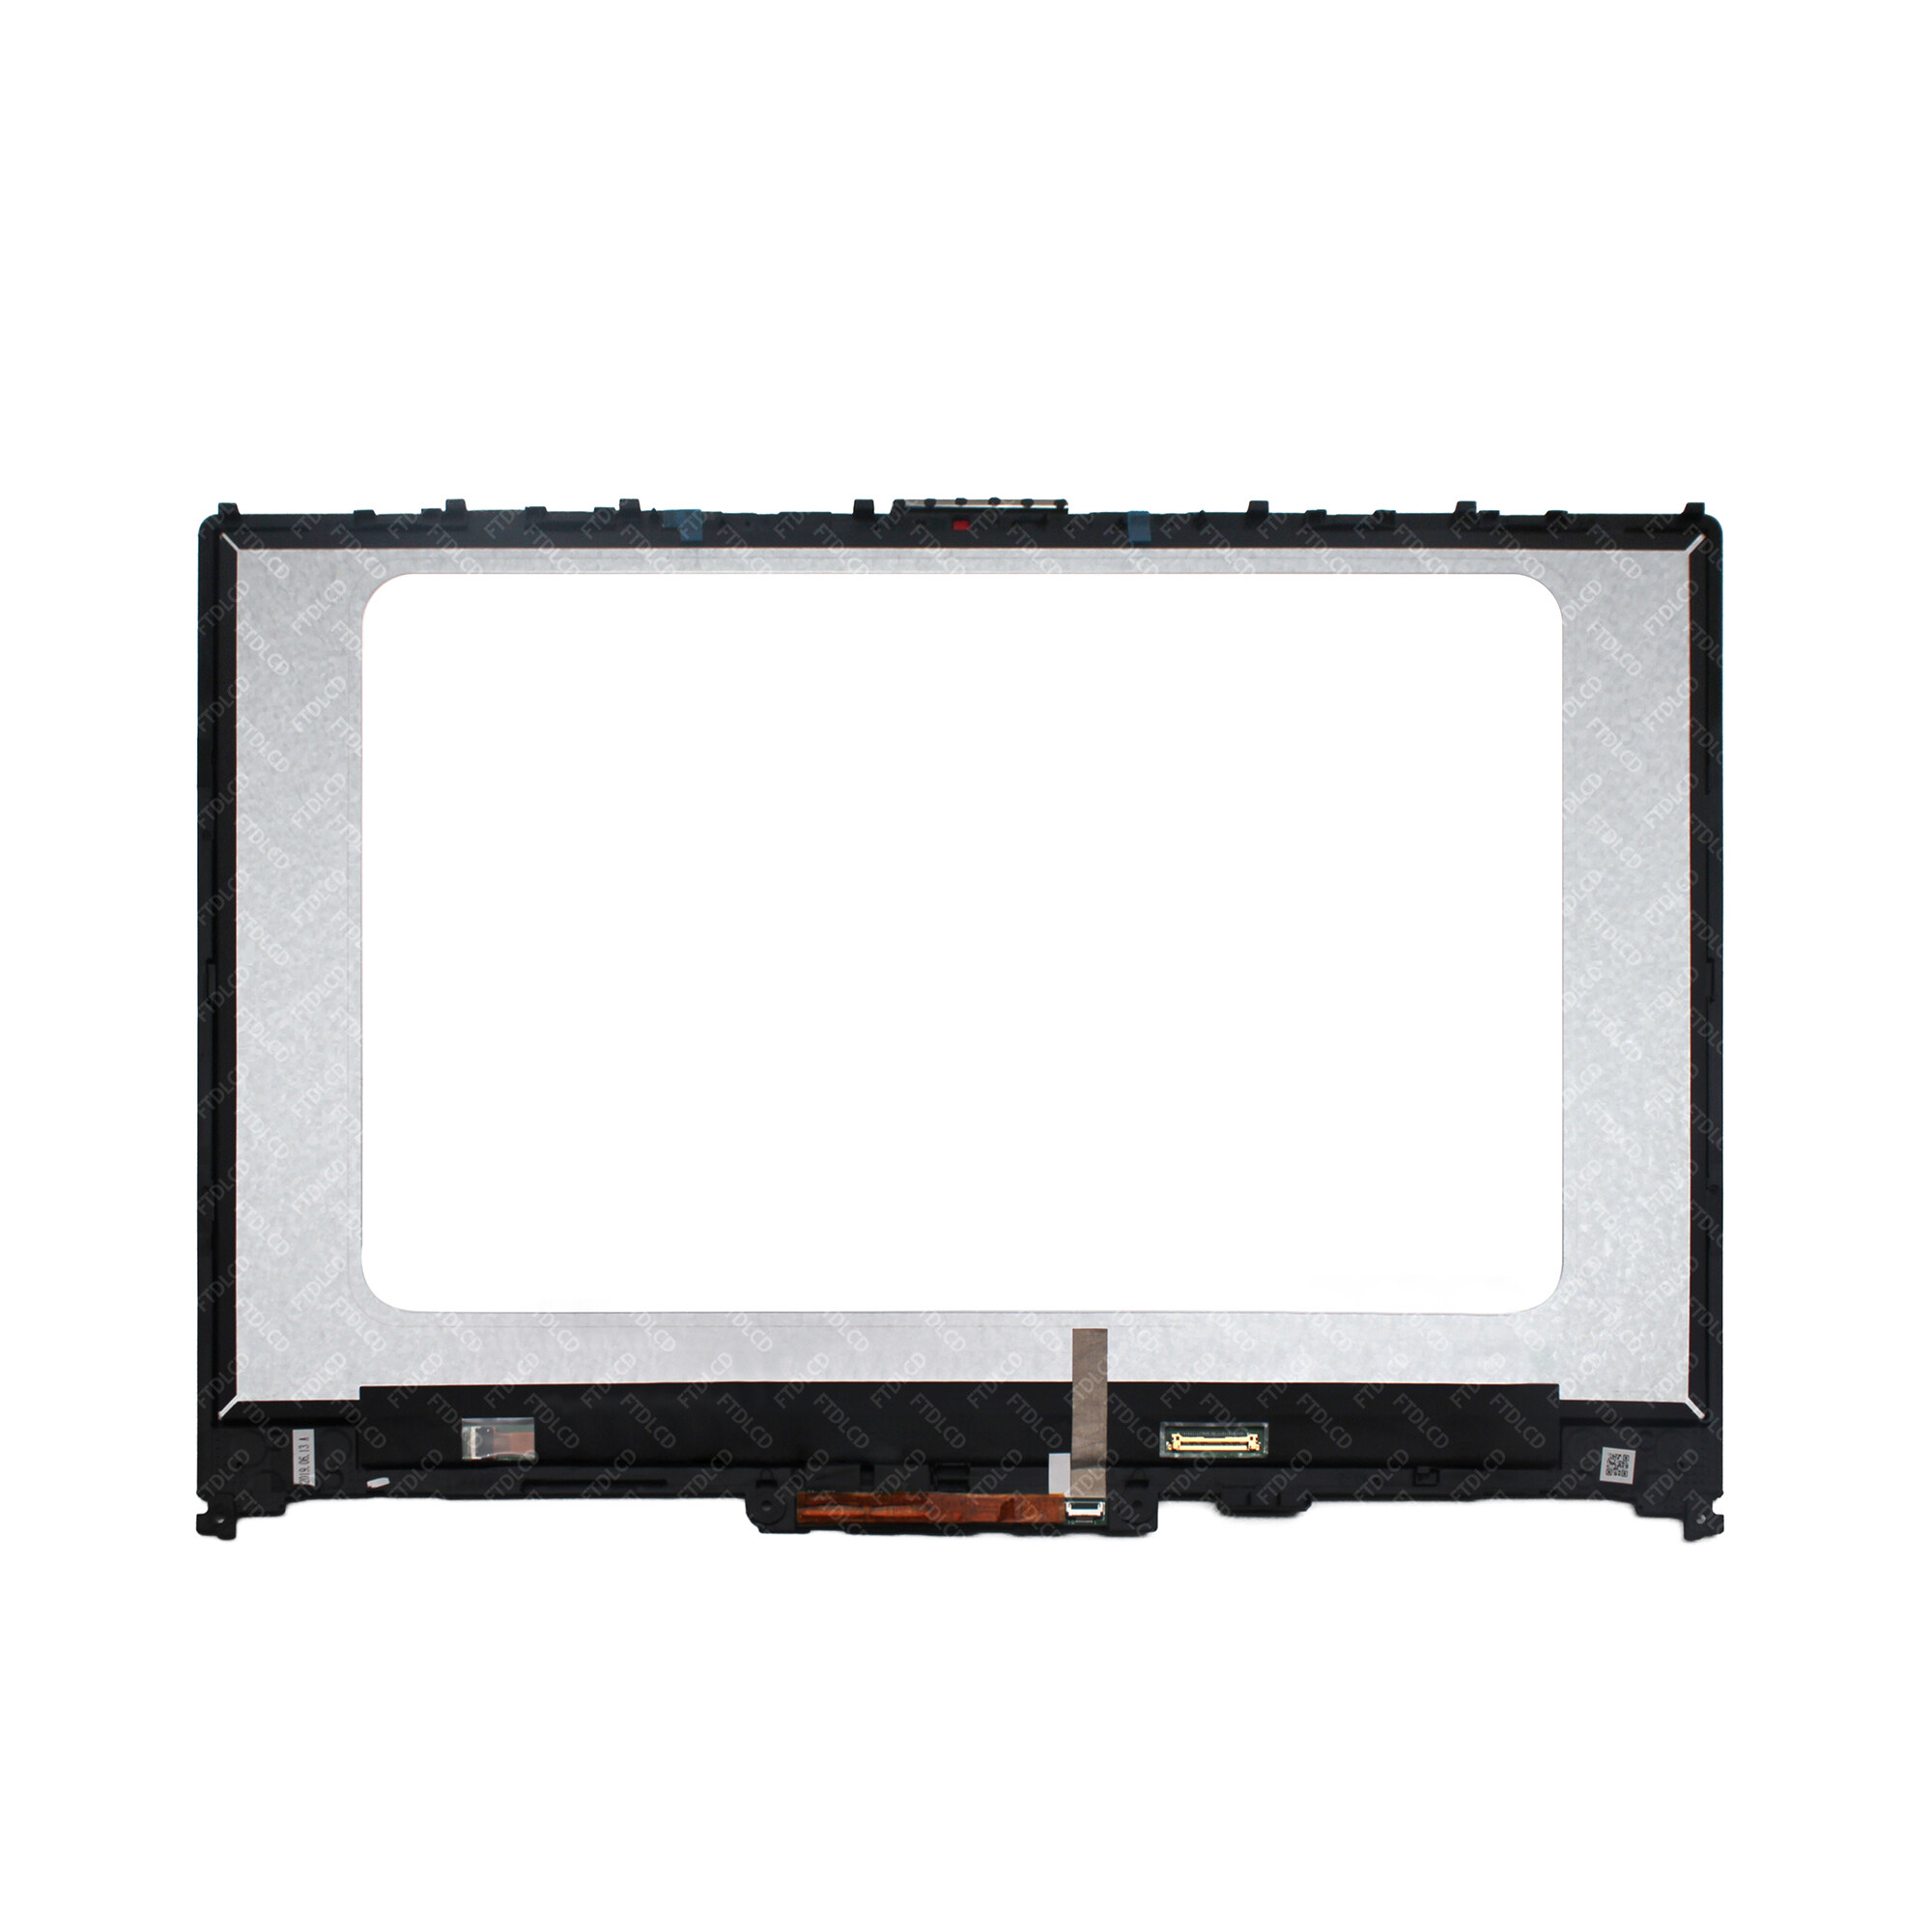 Kreplacement Replacement 15.6 inches FullHD 1080P IPS LED LCD Panel Touch Screen Digitizer Assembly Bezel with Touch Control Board for Lenovo Ideapad Flex-15 Flex-15IWL Flex-15IML Flex-15IIL 81SR 81XH 81XK